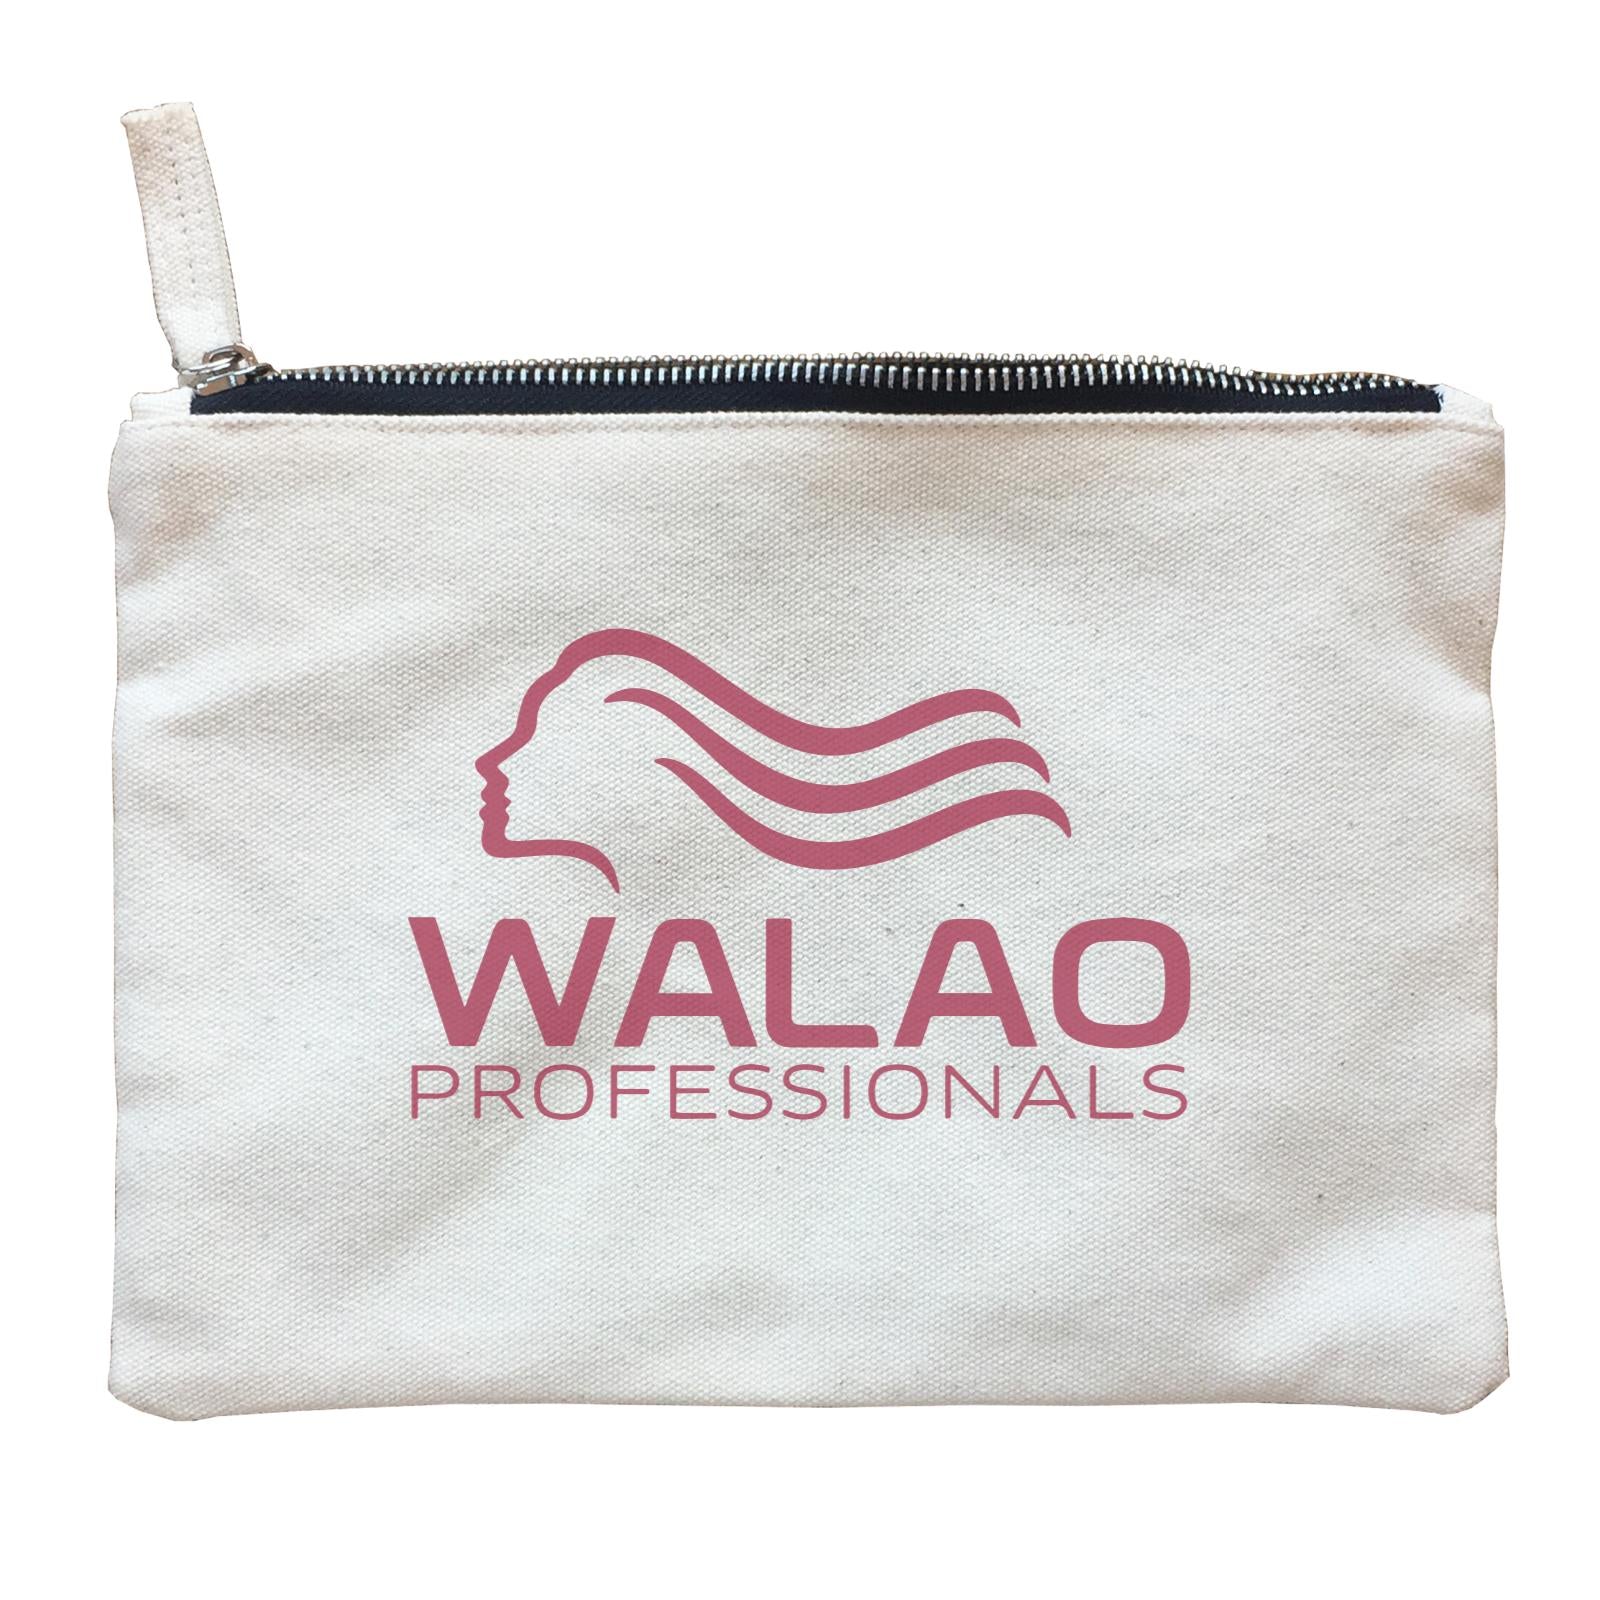 Slang Statement Walao Professional Accessories Zipper Pouch